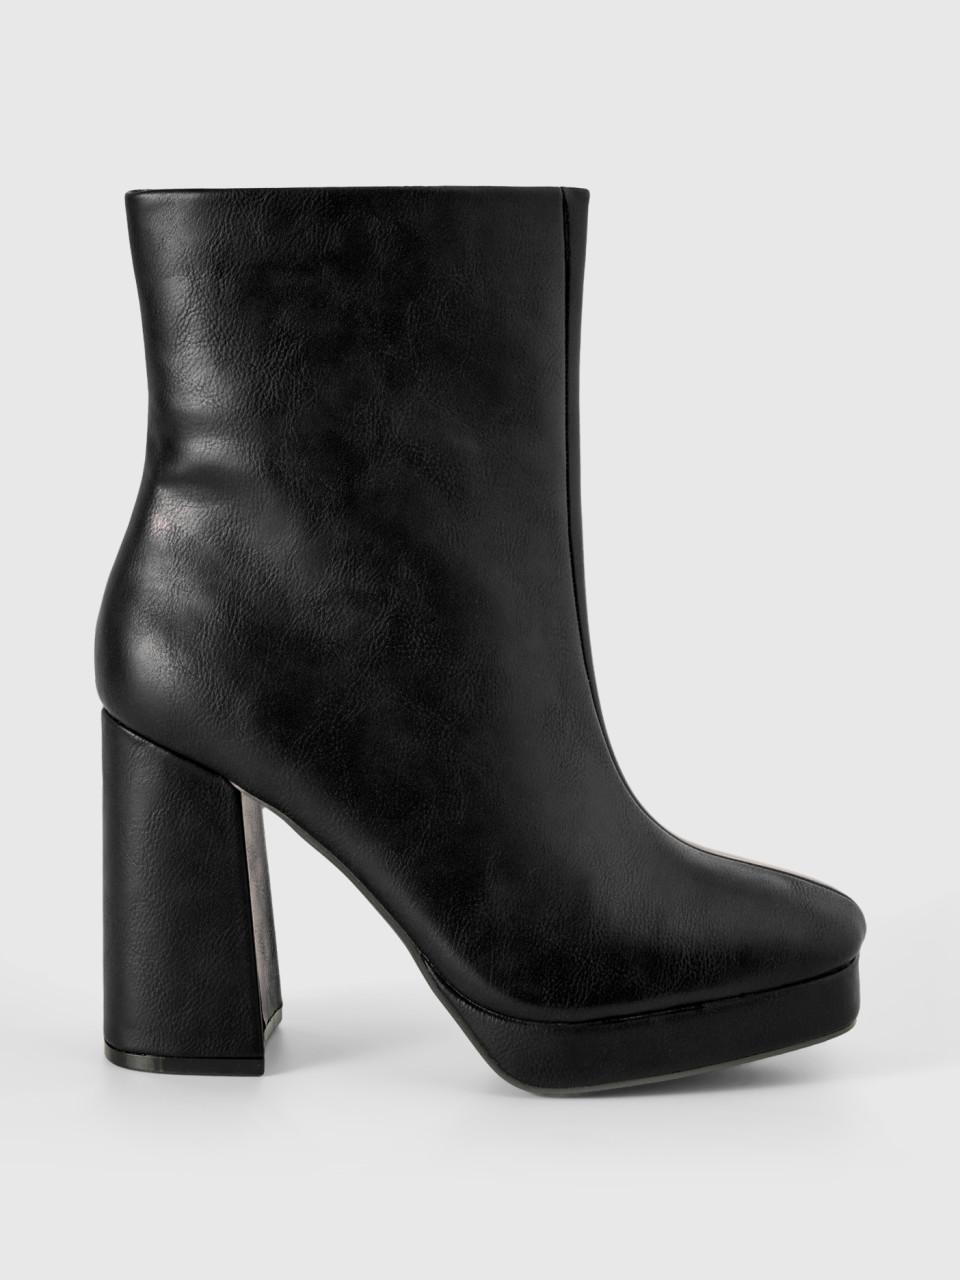 Benetton, Ankle Boots With Heel And Platform, Black, Women